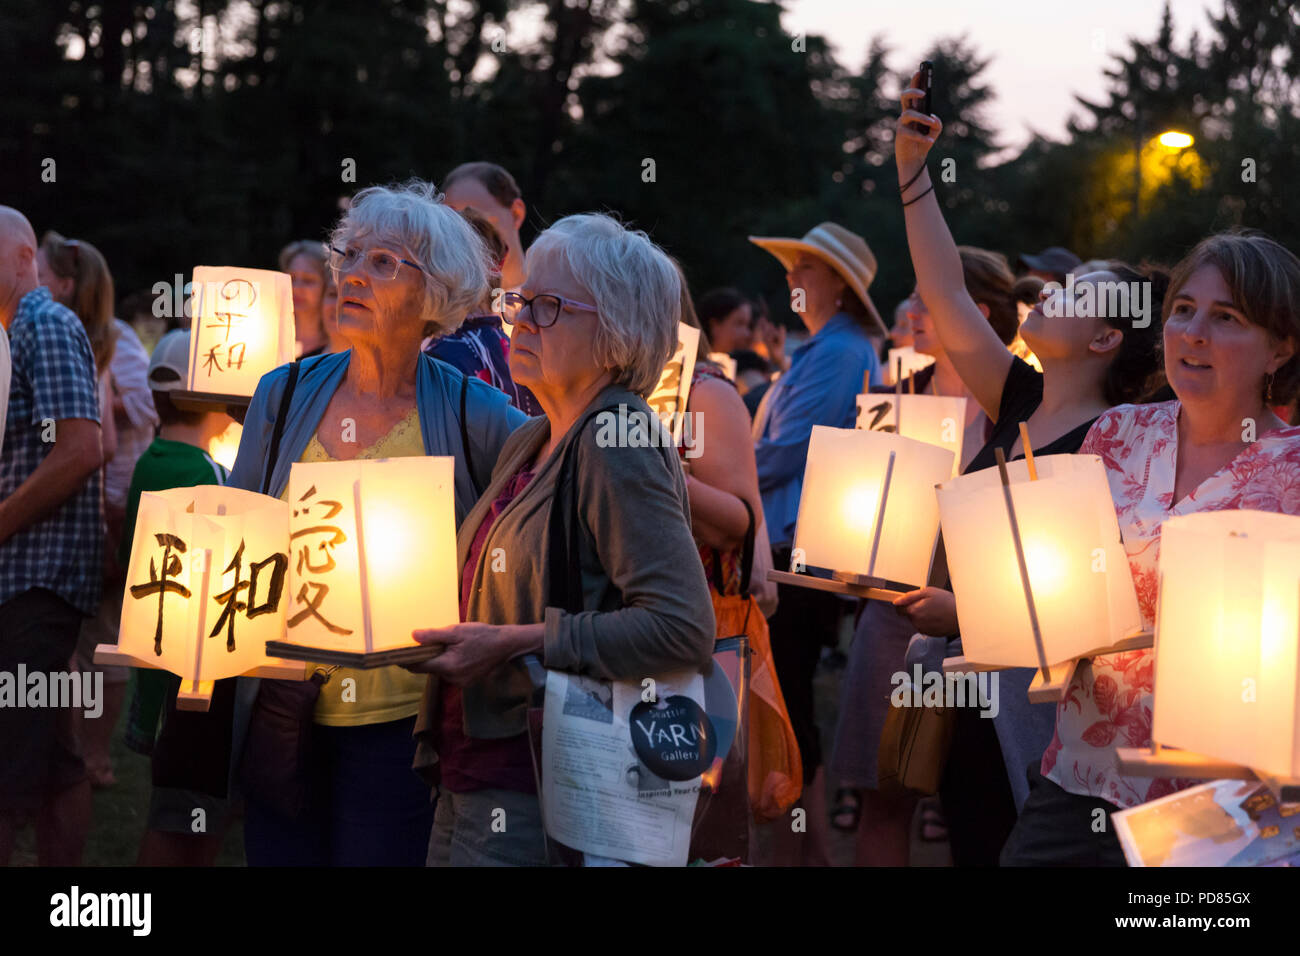 Seattle, Washington: Participants line up with paper lanterns at the From Hiroshima To Hope gathering at Green Lake Park. The ceremony is held in remembrance of atomic bomb victims on the anniversary of the bombing of Hiroshima, Japan. The annual lantern floating ceremony honors victims of the bombings of Hiroshima and Nagasaki, and all victims of violence.  The ceremony is an adaptation of an ancient Japanese Buddhist ritual, the Toro Nagashi, in which lanterns represent Credit: Paul Christian Gordon/Alamy Live News Stock Photo